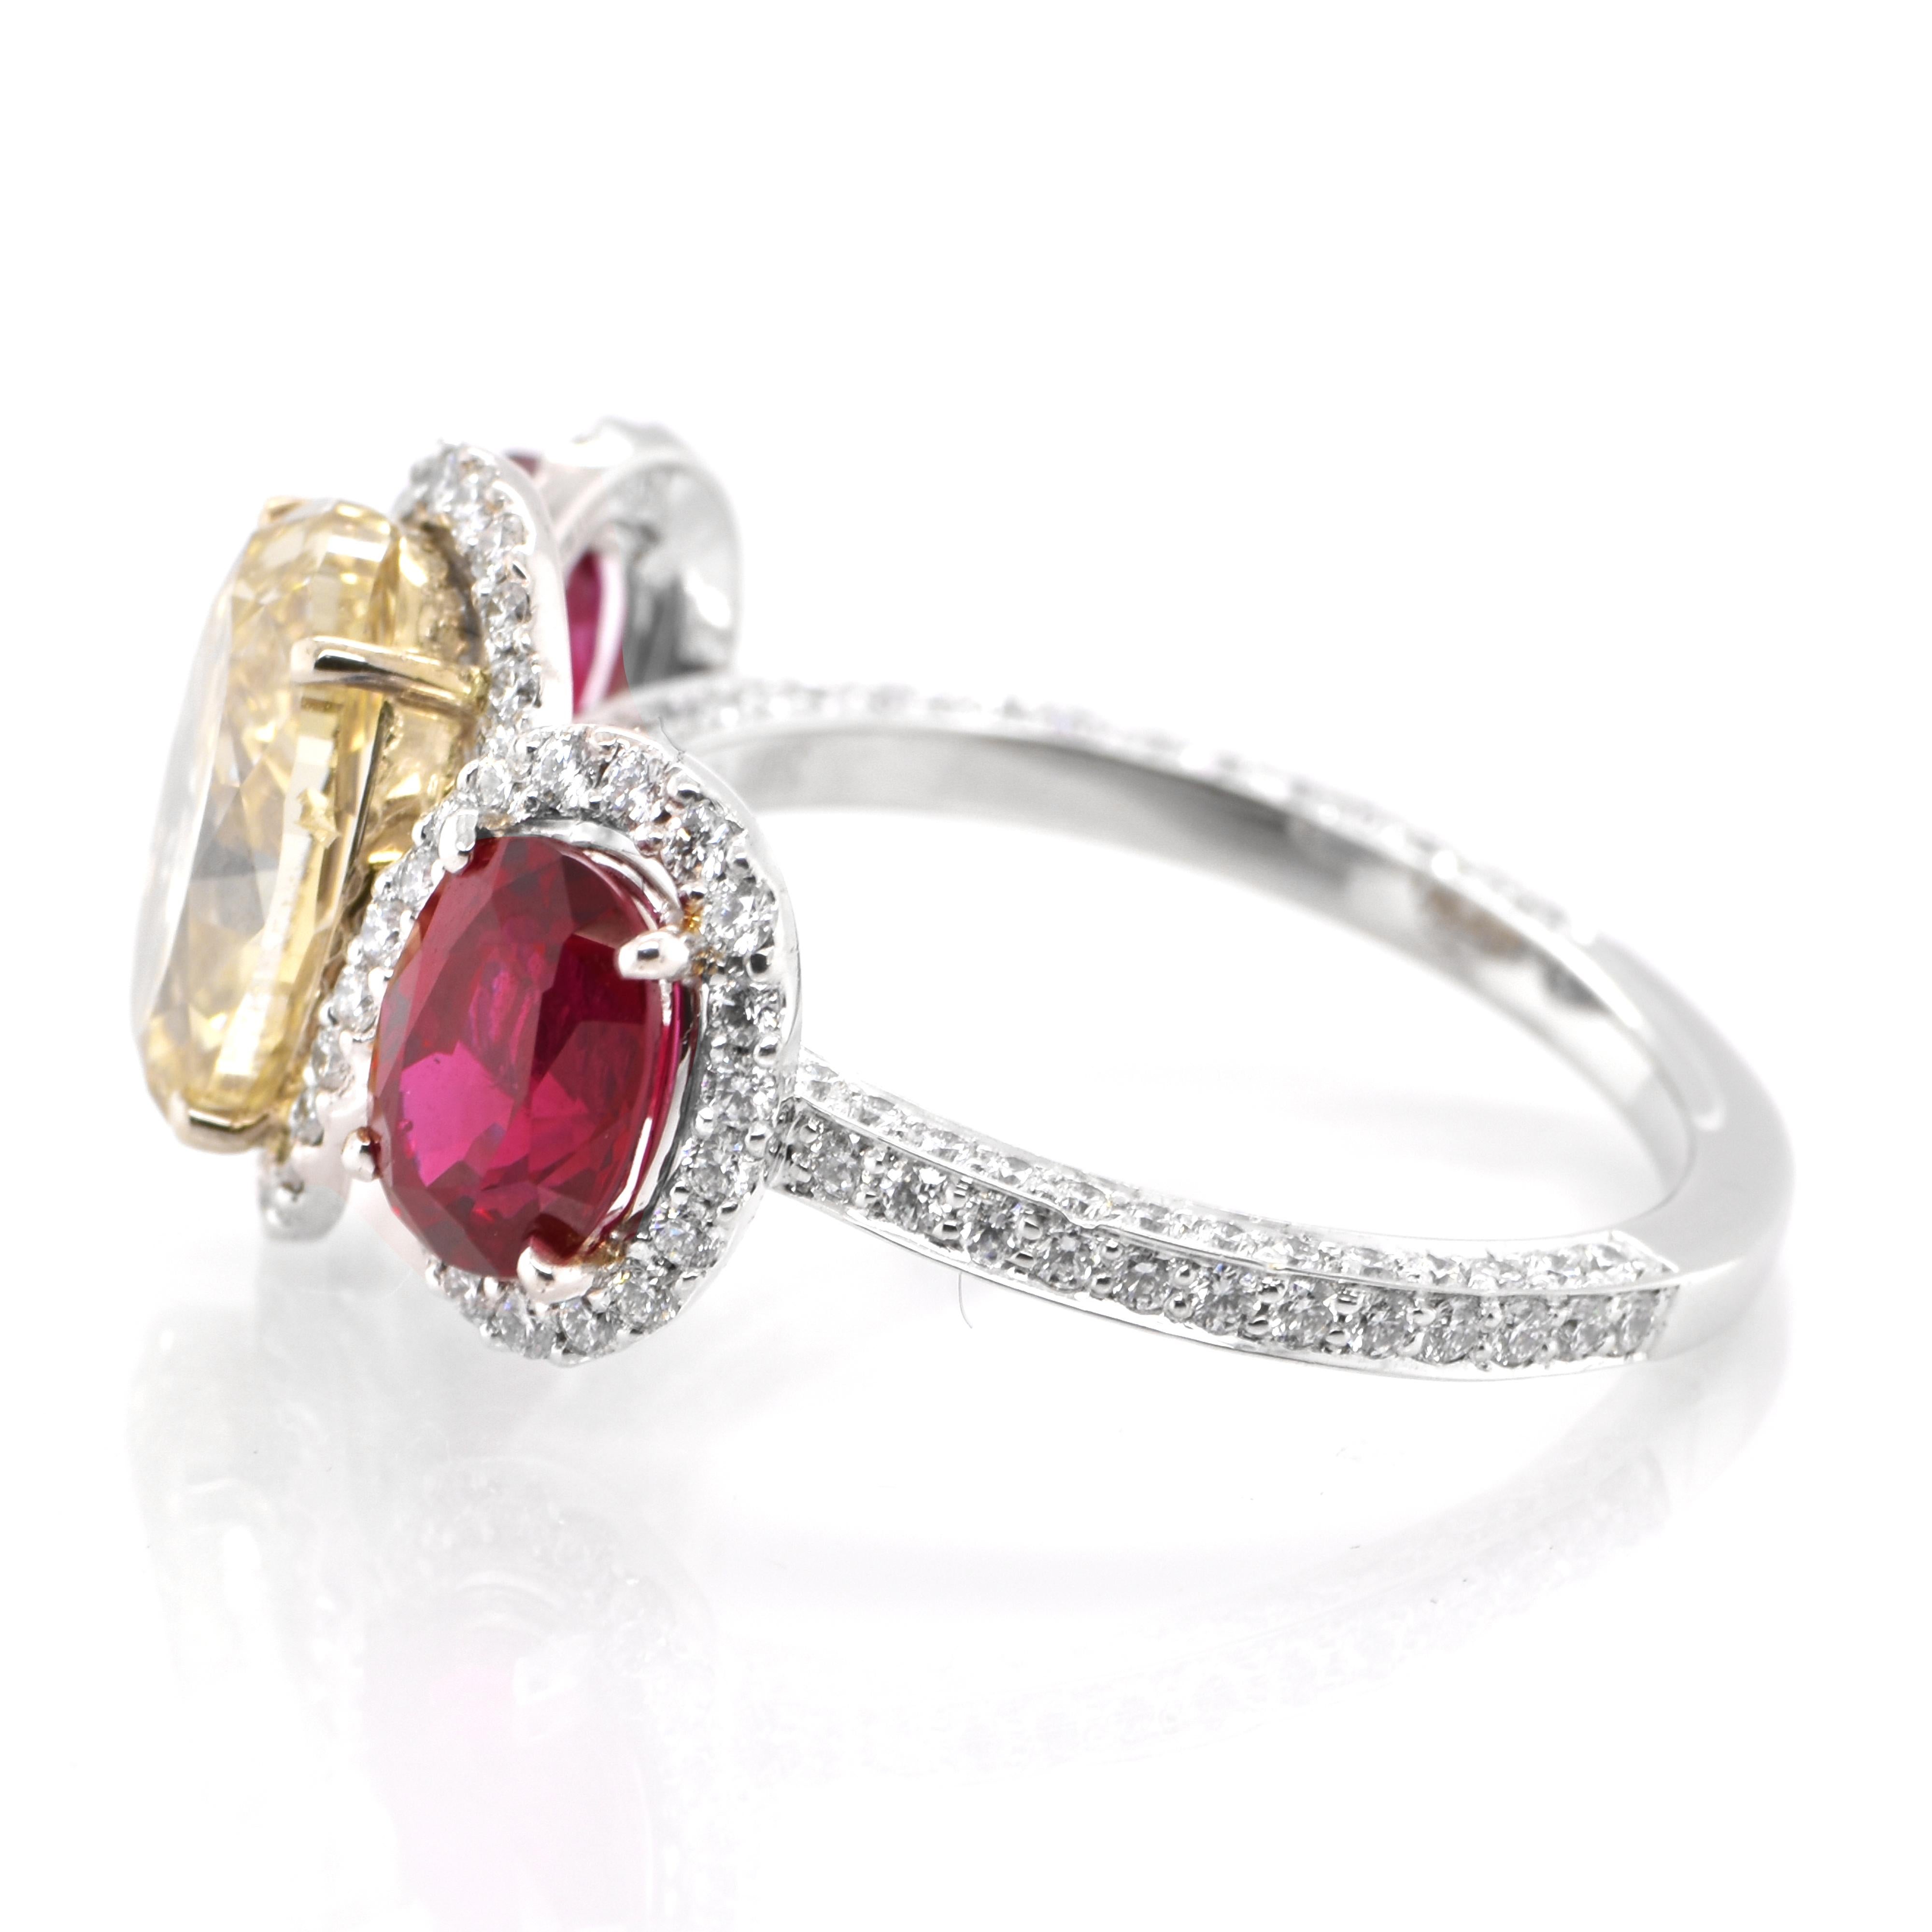 Oval Cut 2.41 Carat Natural Fancy Brownish Yellow Diamond and Ruby Ring Set in Platinum